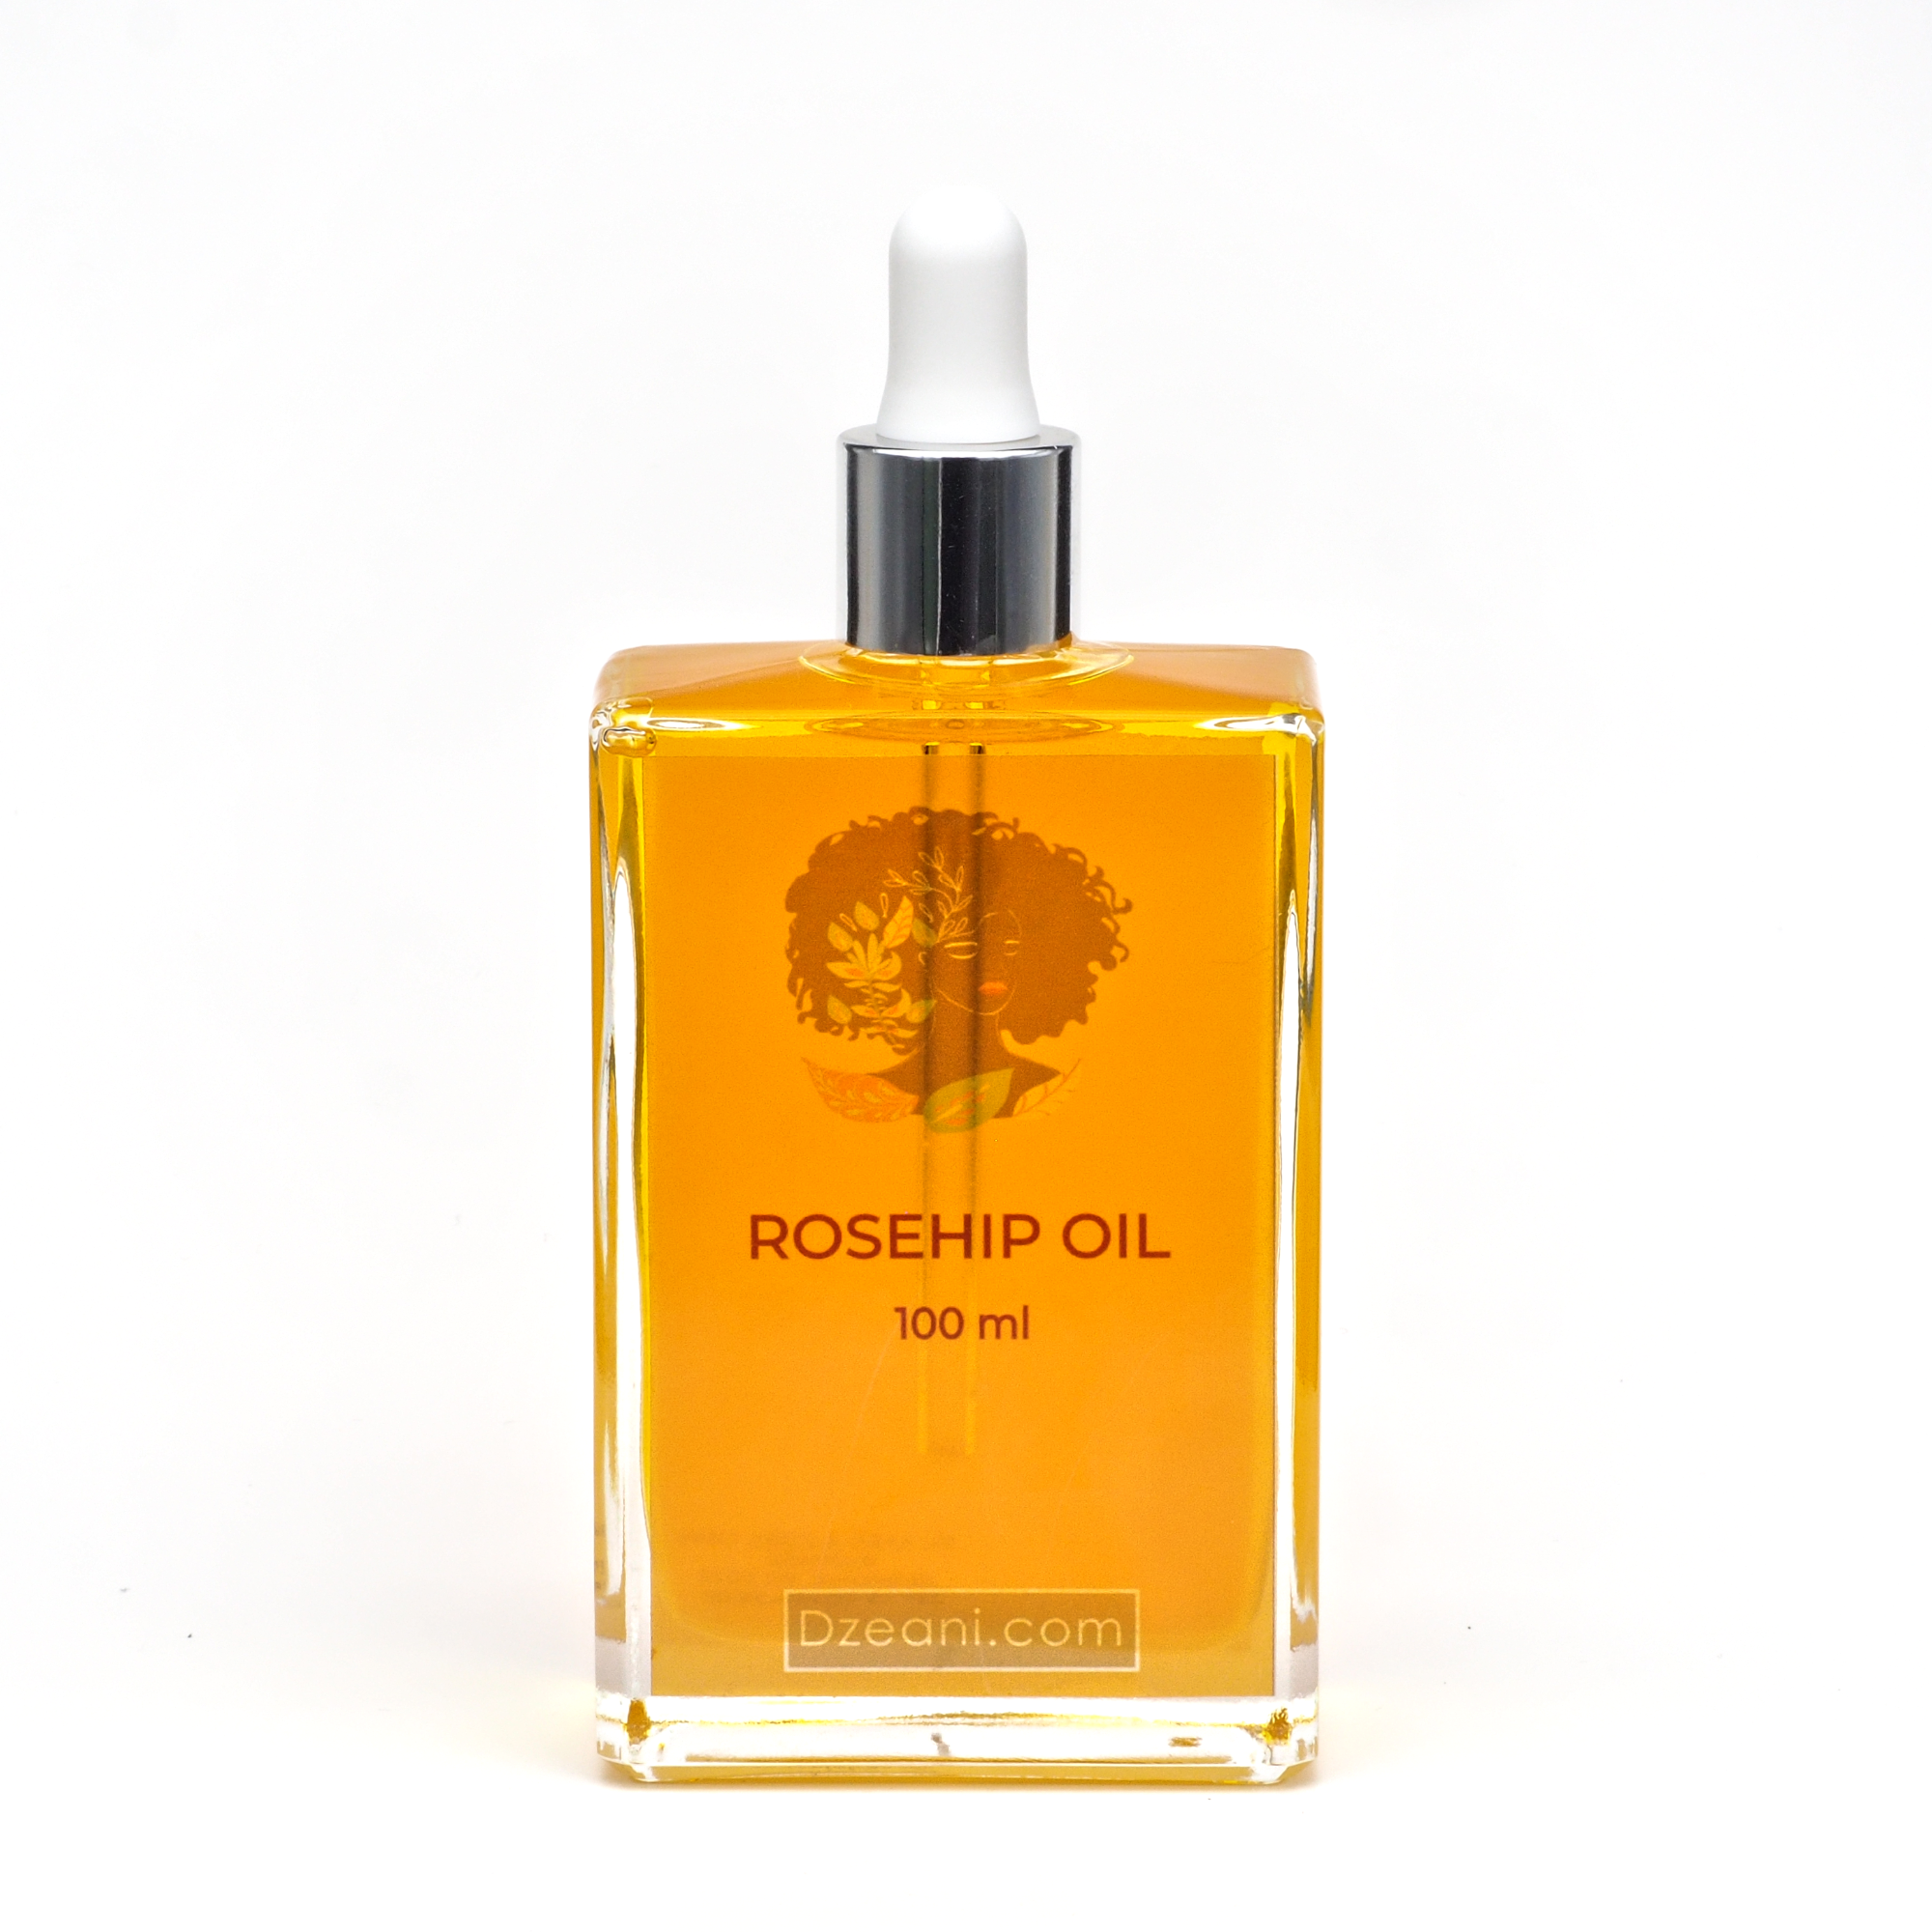 ROSEHIP OIL 100ml from Dzeani (100% Pure Natural Oil)